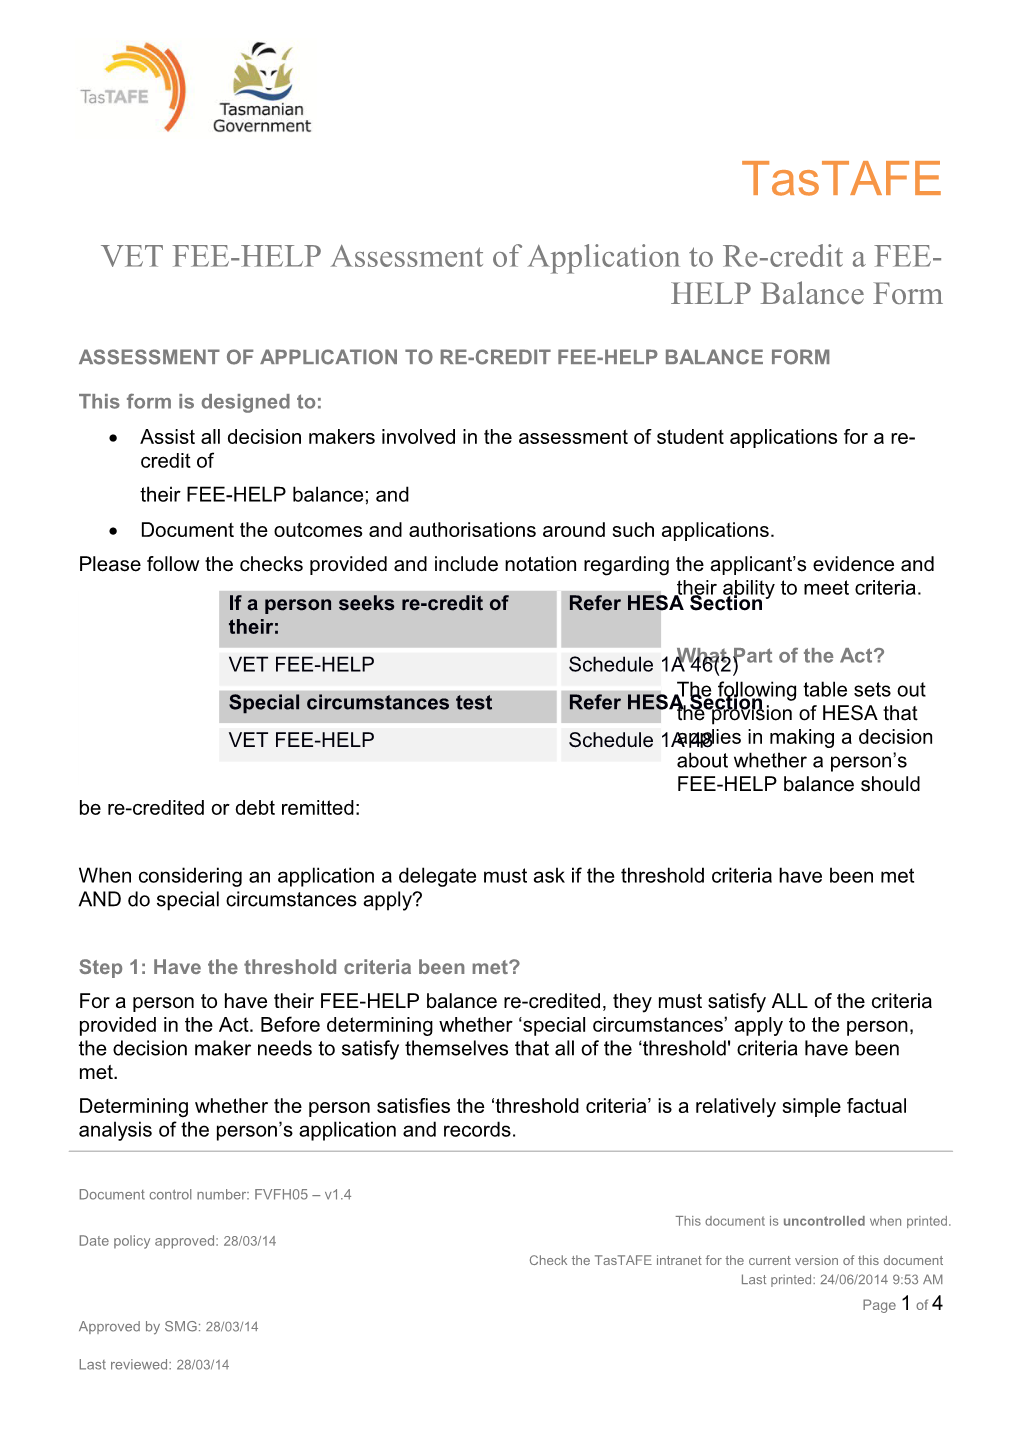 VET FEE-HELP Assessment of Application to Re-Credit FEE-HELP Balance Form